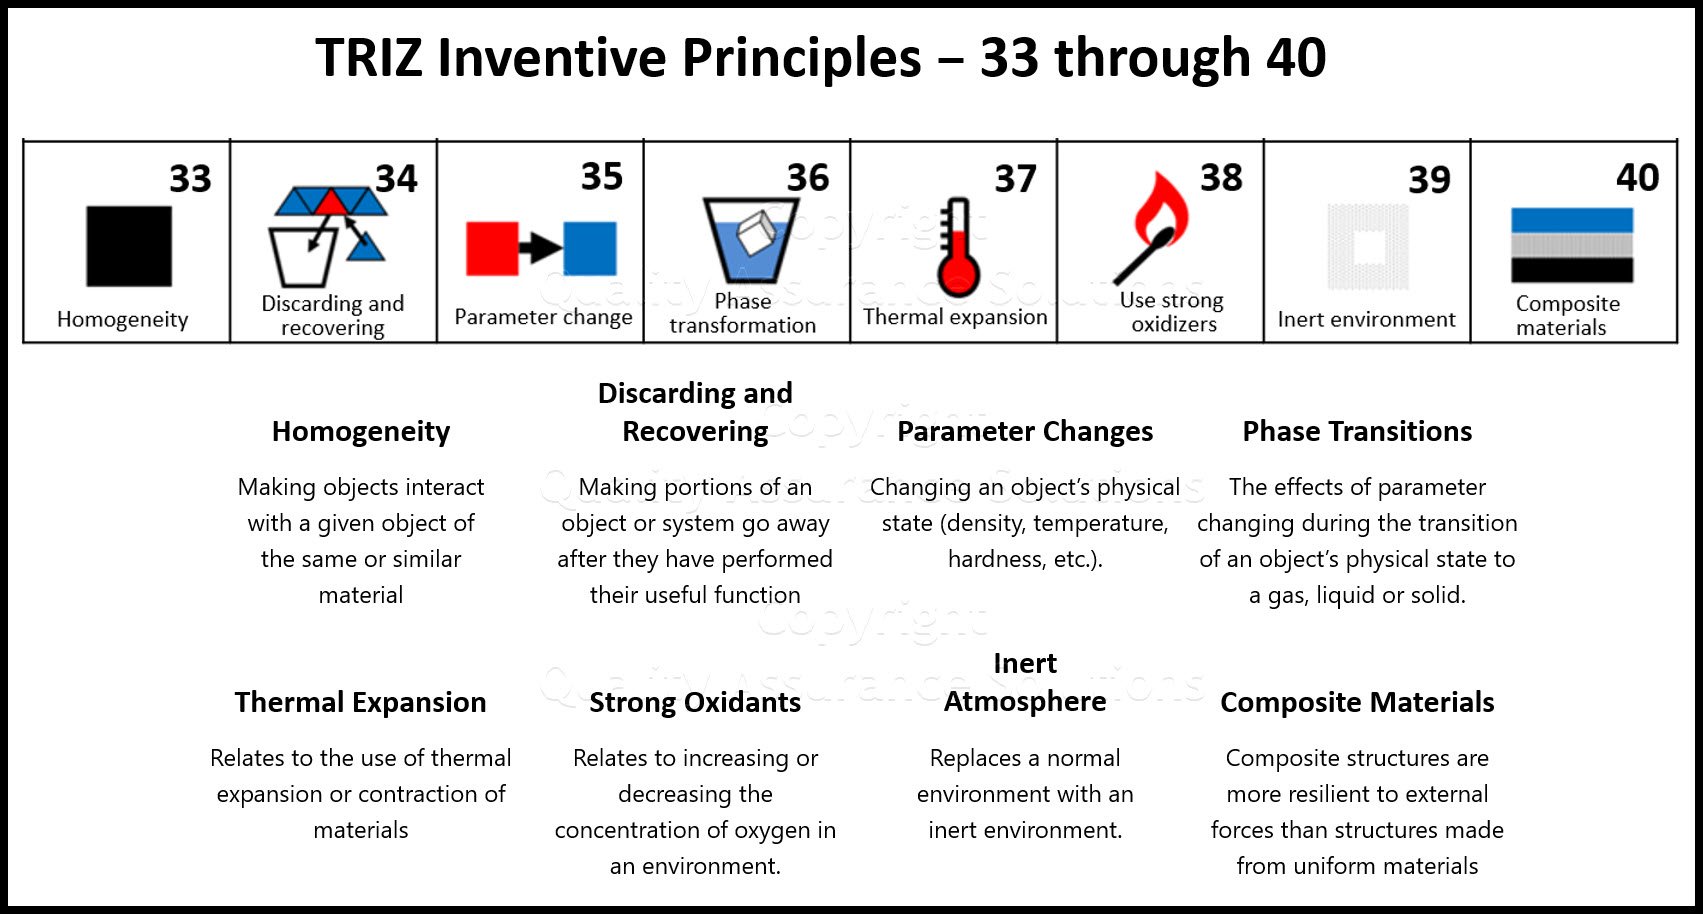 See our detail List of TRIZ Inventive Principles 33 through 40. This covers Parameter Changes, Phases, Thermal Expansion, Inert Atmosphere and others